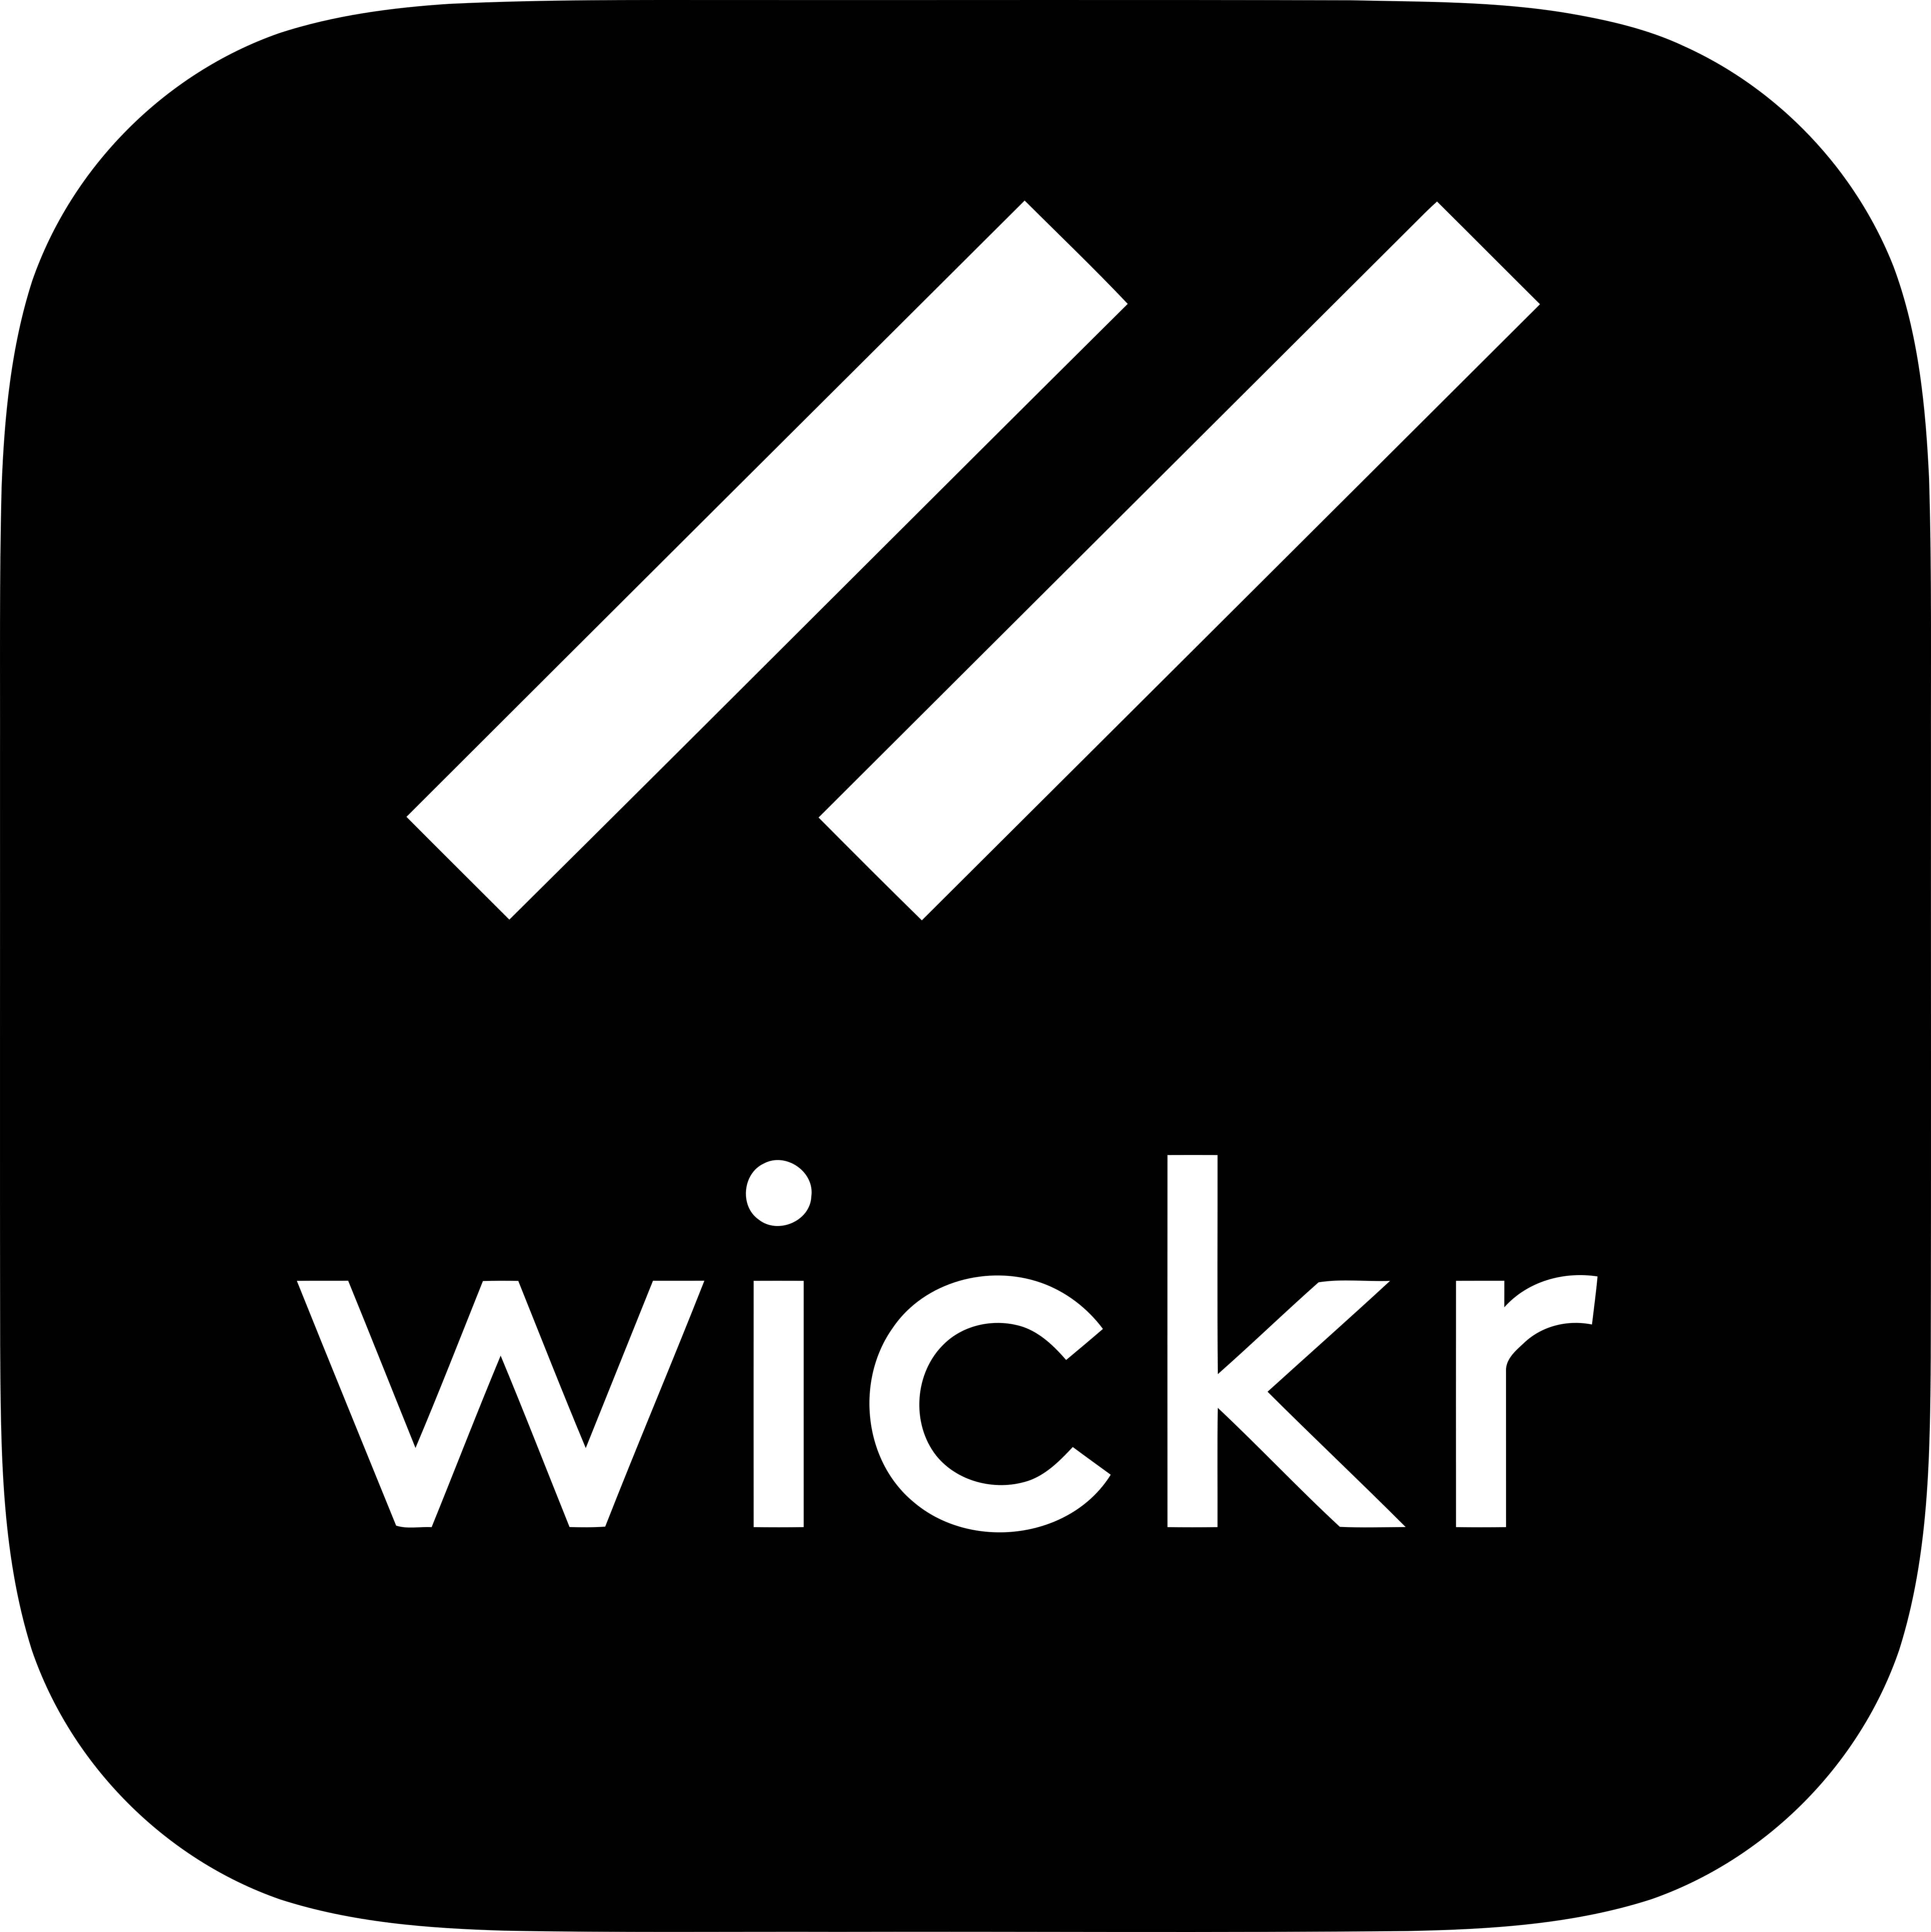 Wickr – Logos Download